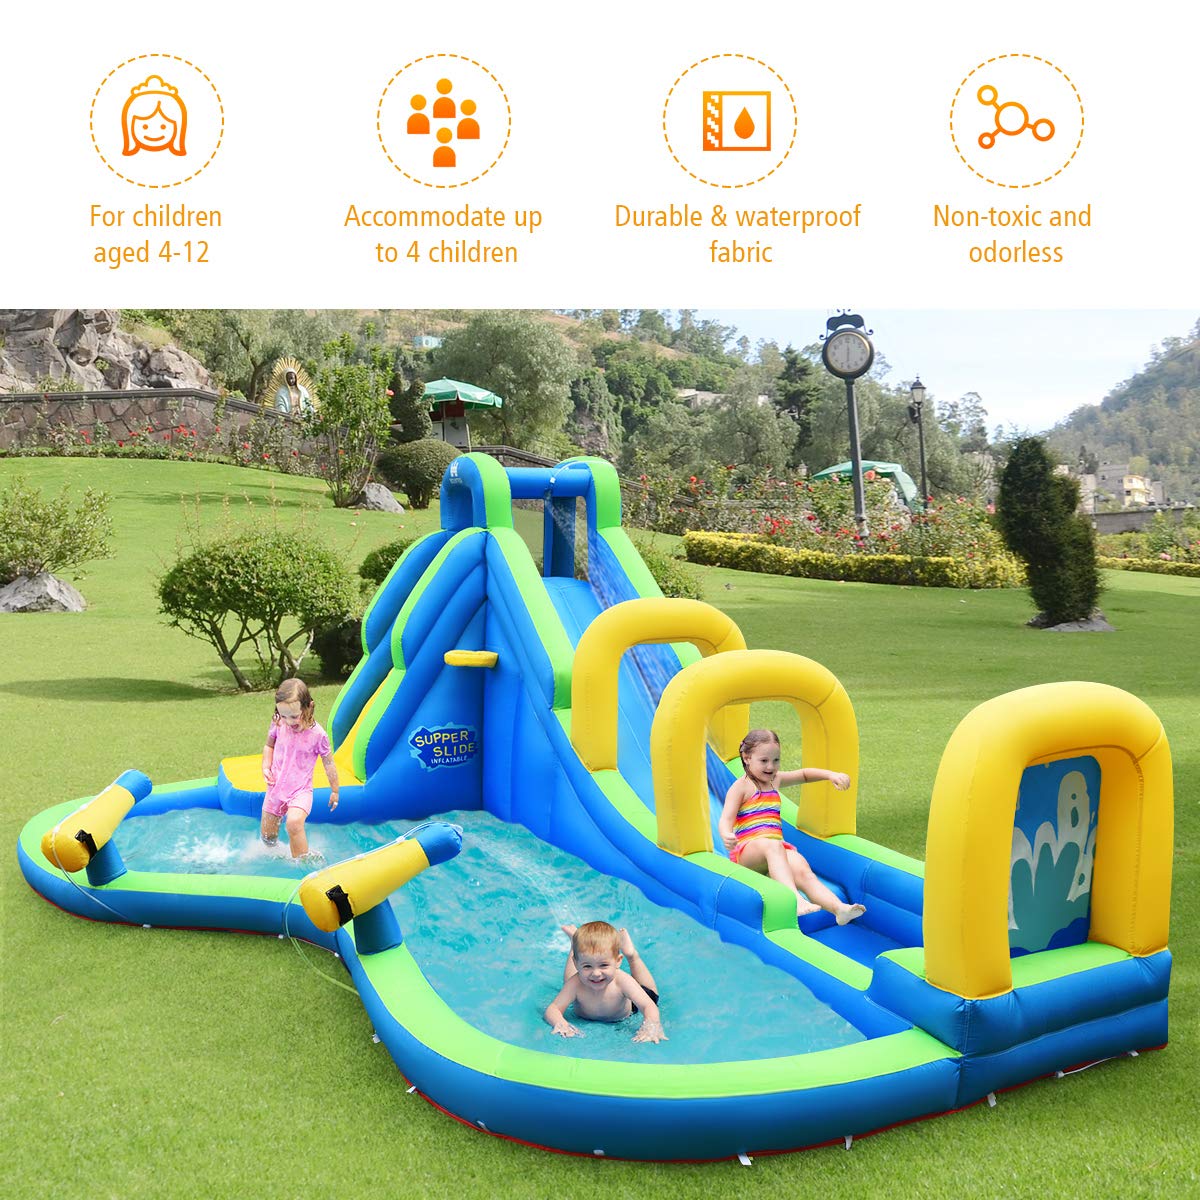 BOUNTECH Inflatable Water Slide, Mega Waterslide Park for Kids Backyard Fun w/Adventure Long Slide, Splash Pool, Climbing, Blow up Water Slides Inflatables for Kids and Adults Outdoor Party Gifts Without Blower